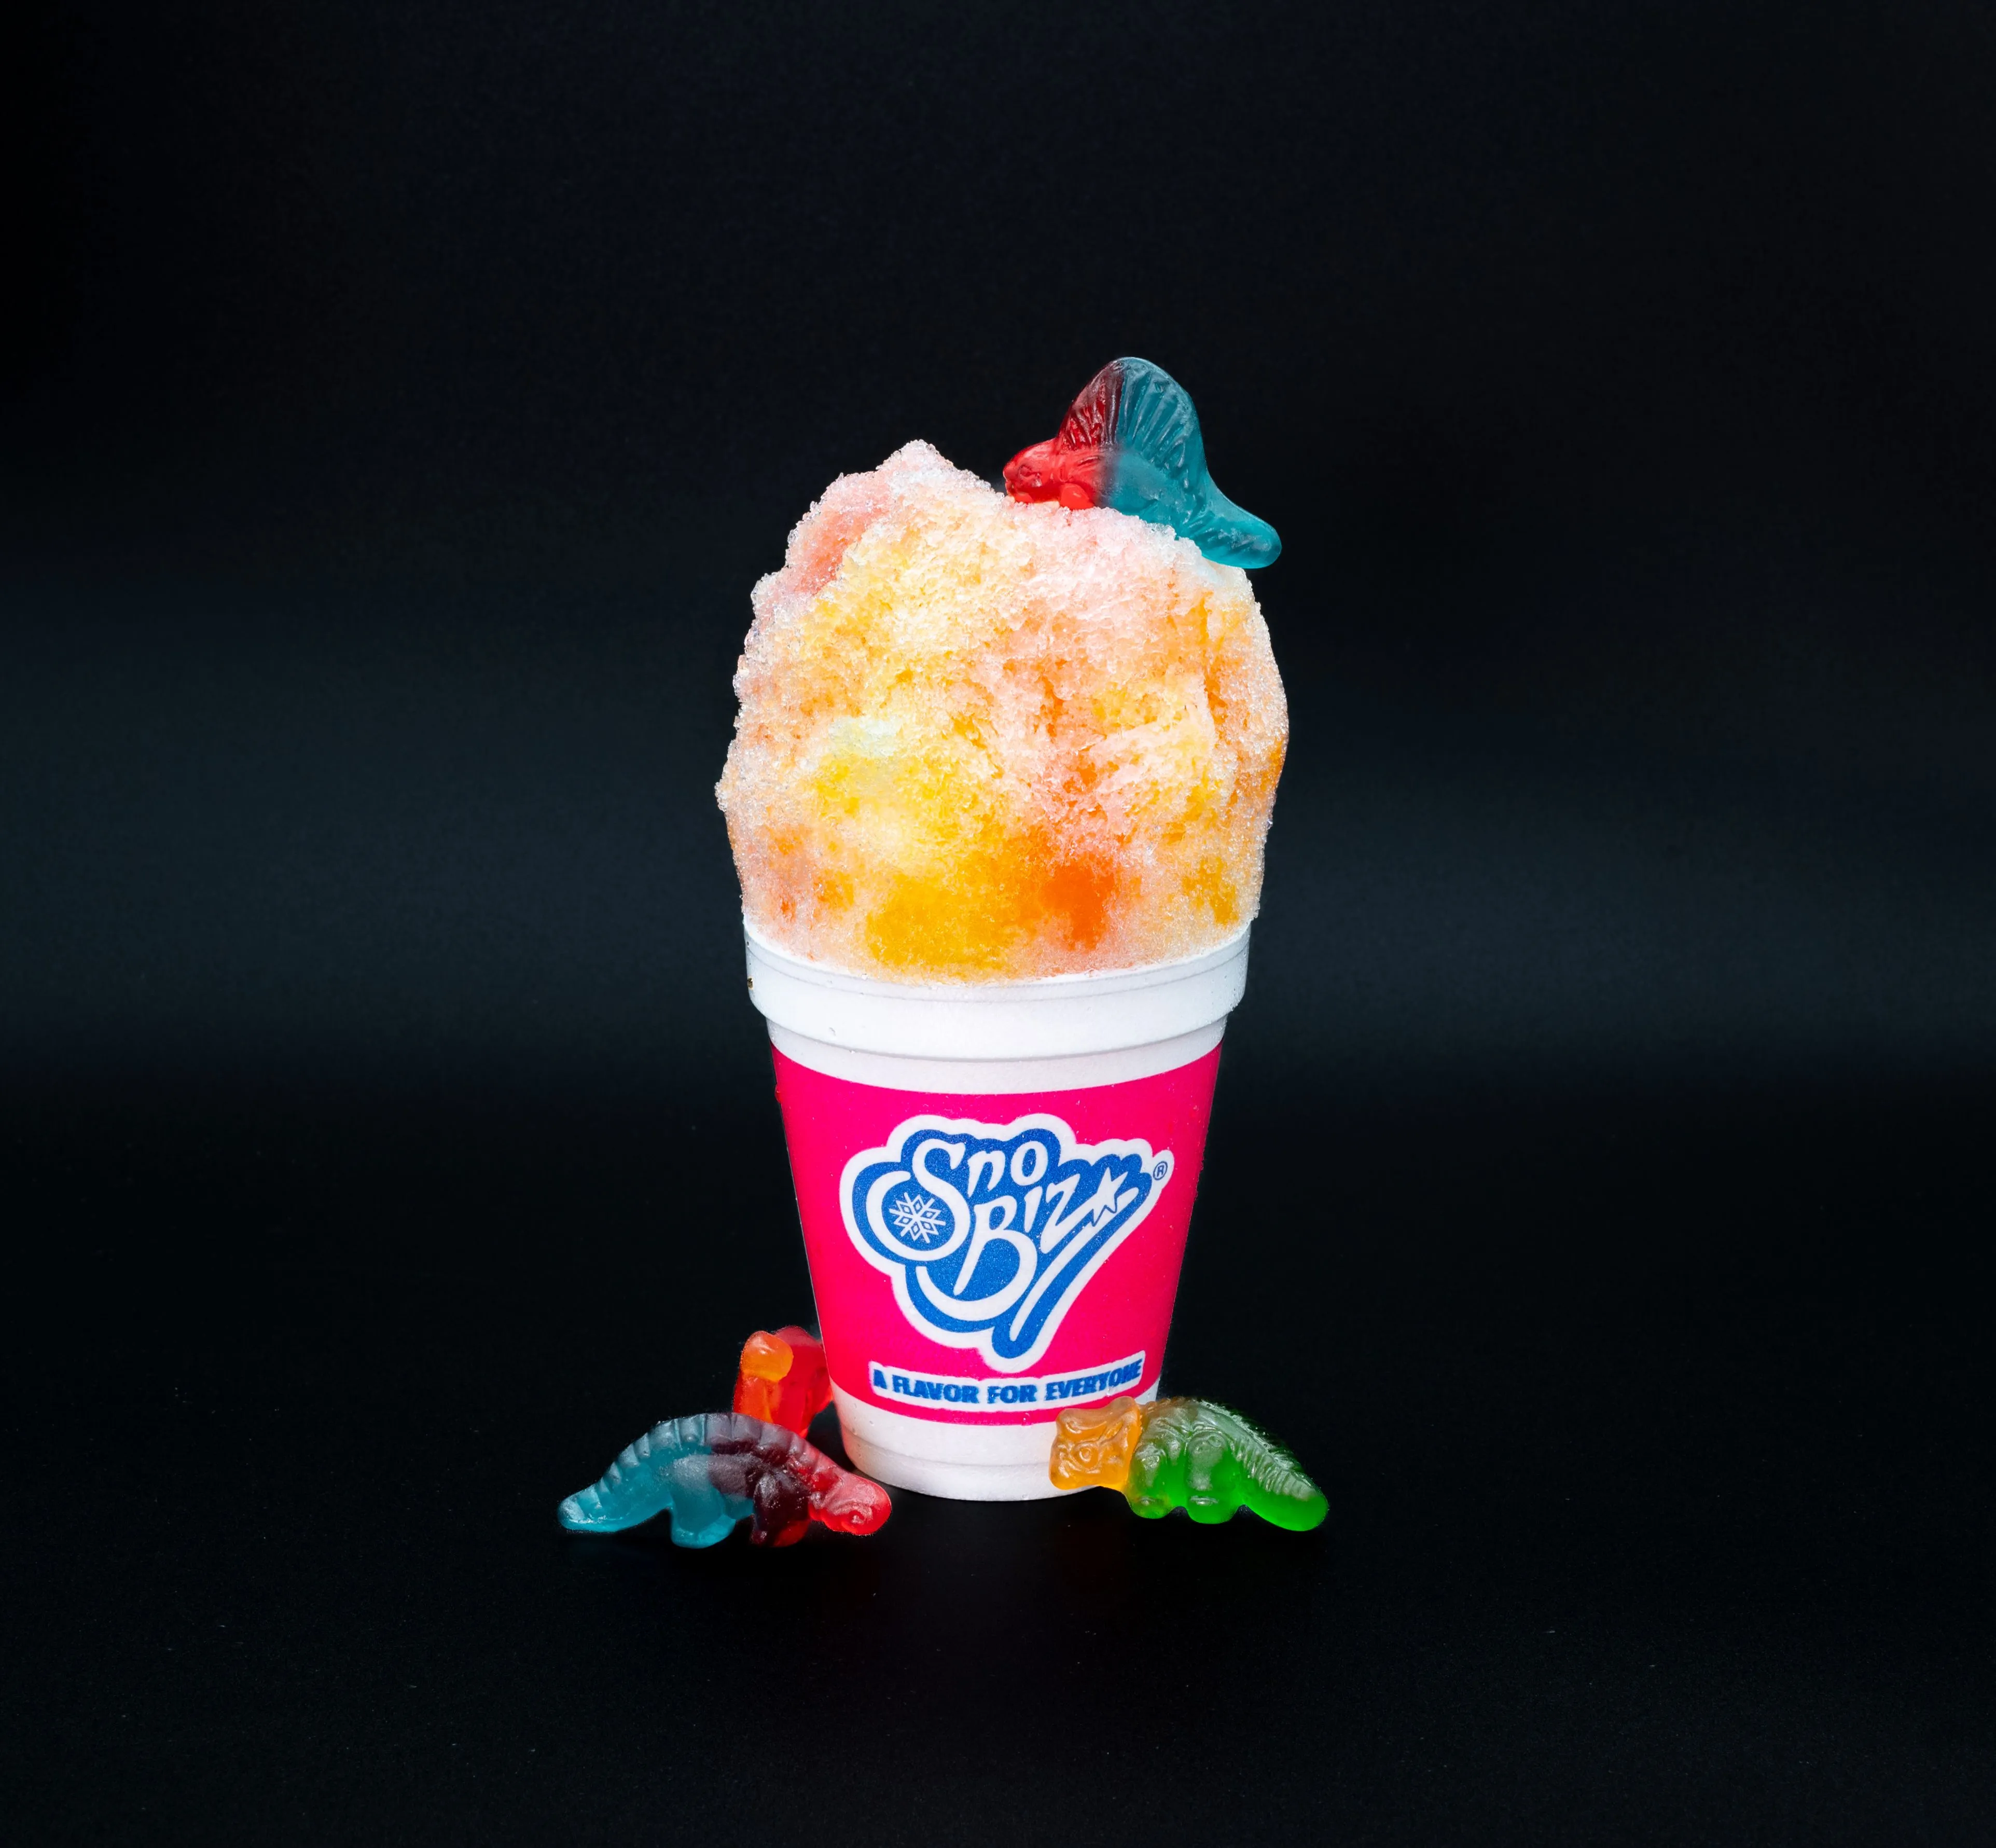 Colorful shaved ice in a branded Sno Biz cup with gummy candies on top and around it, on a black background.